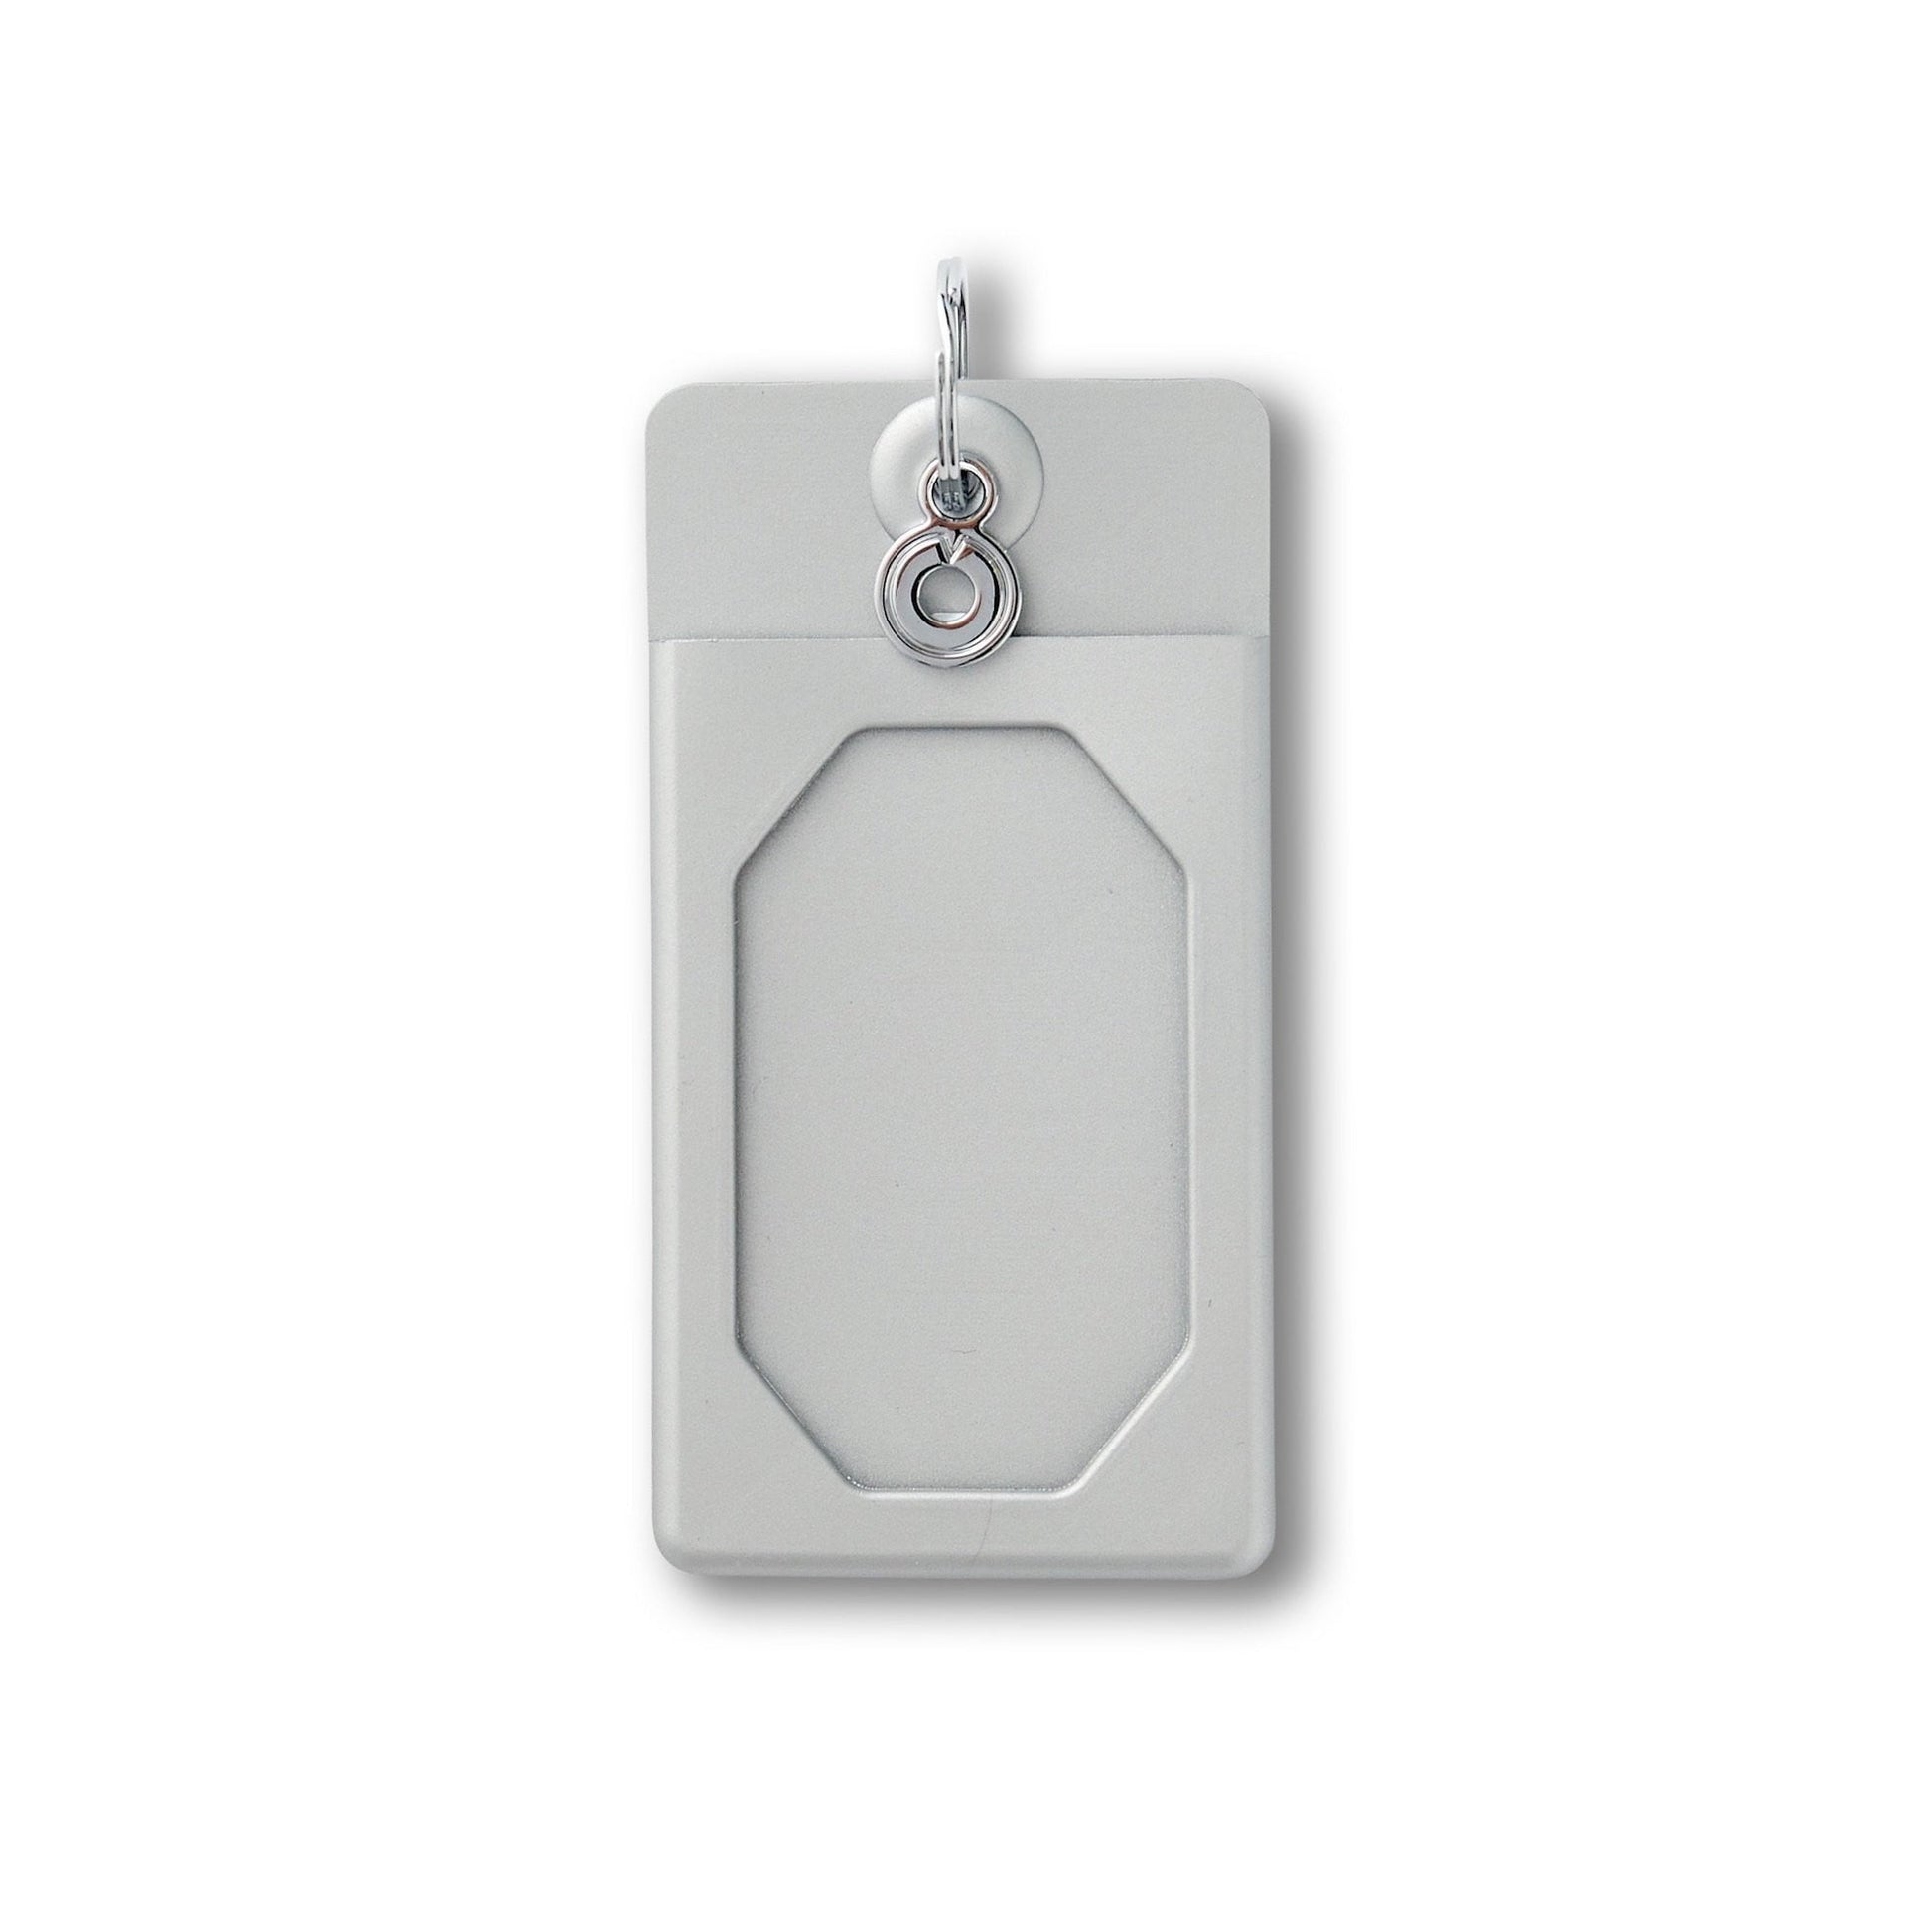 Oventure ID Case in Solid Quicksilver pearlized silicone.  It is silver and has an open window for id cards.